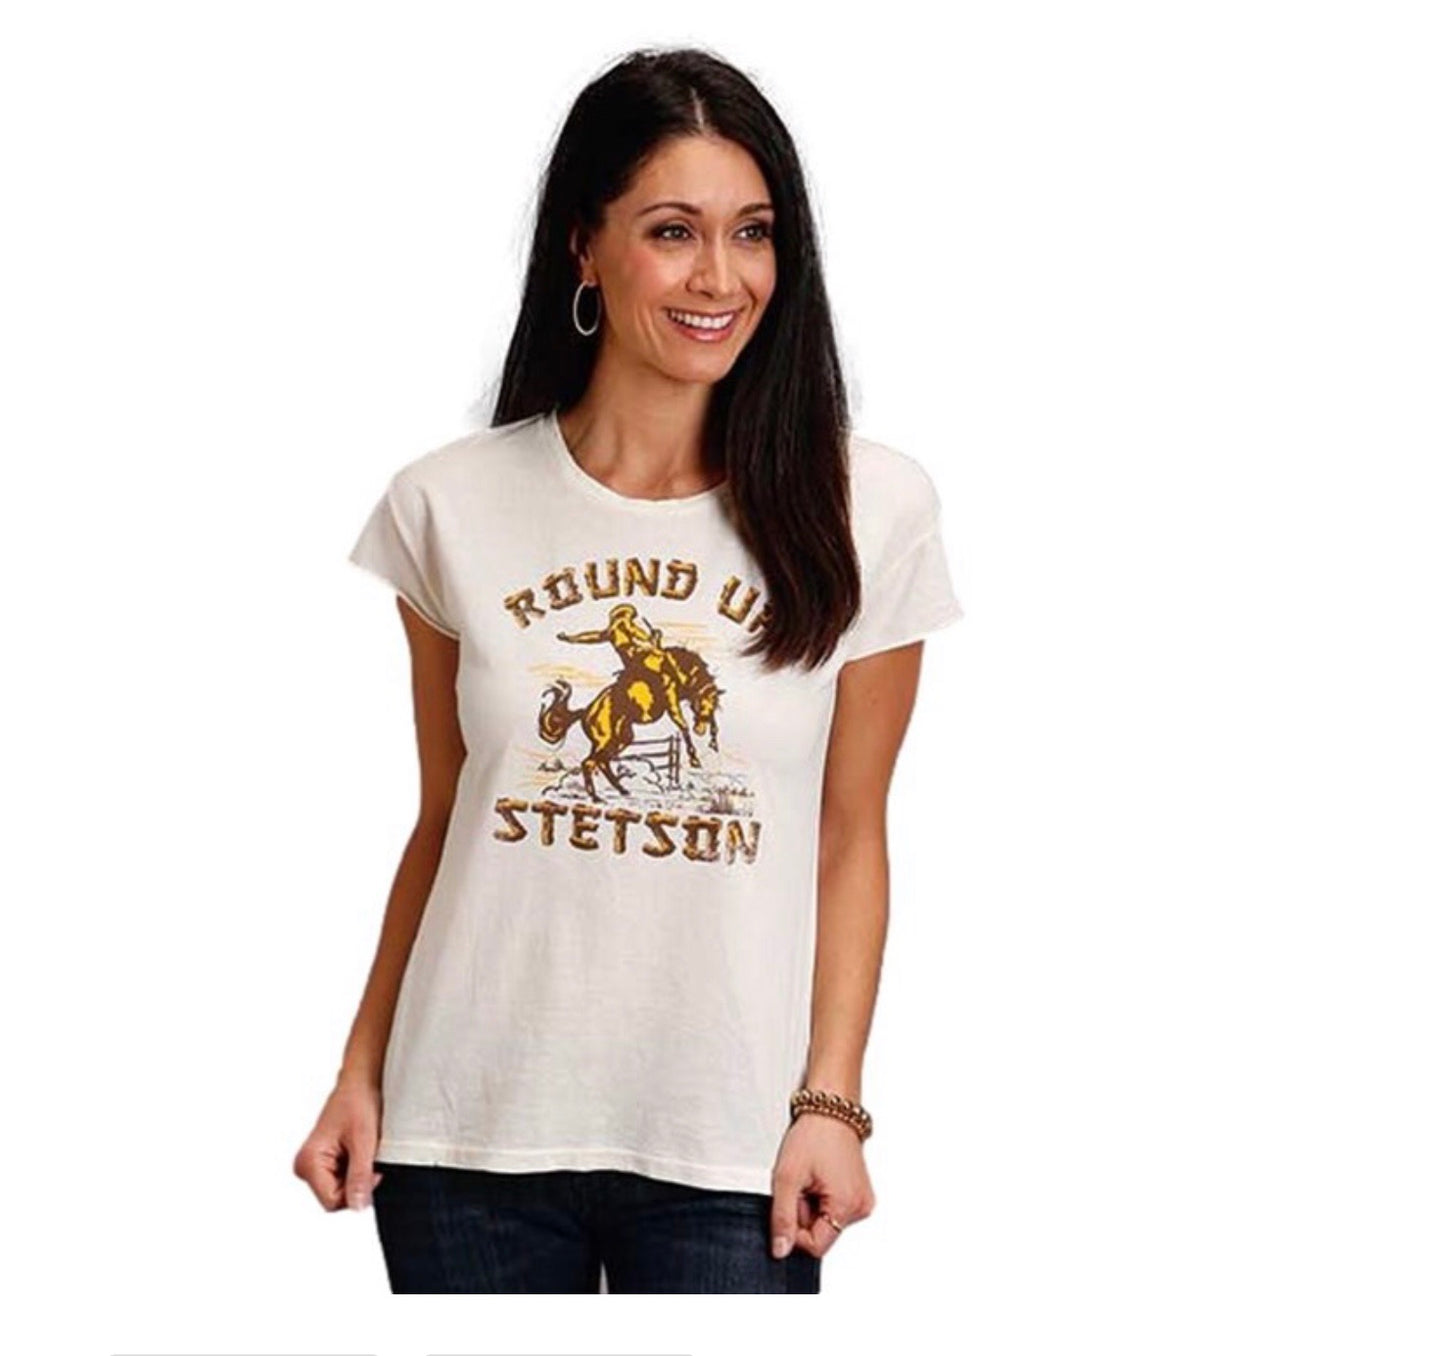 Shirts Women’s Stetson Gals Ranch Graphic Tee 11-039-0562-0802